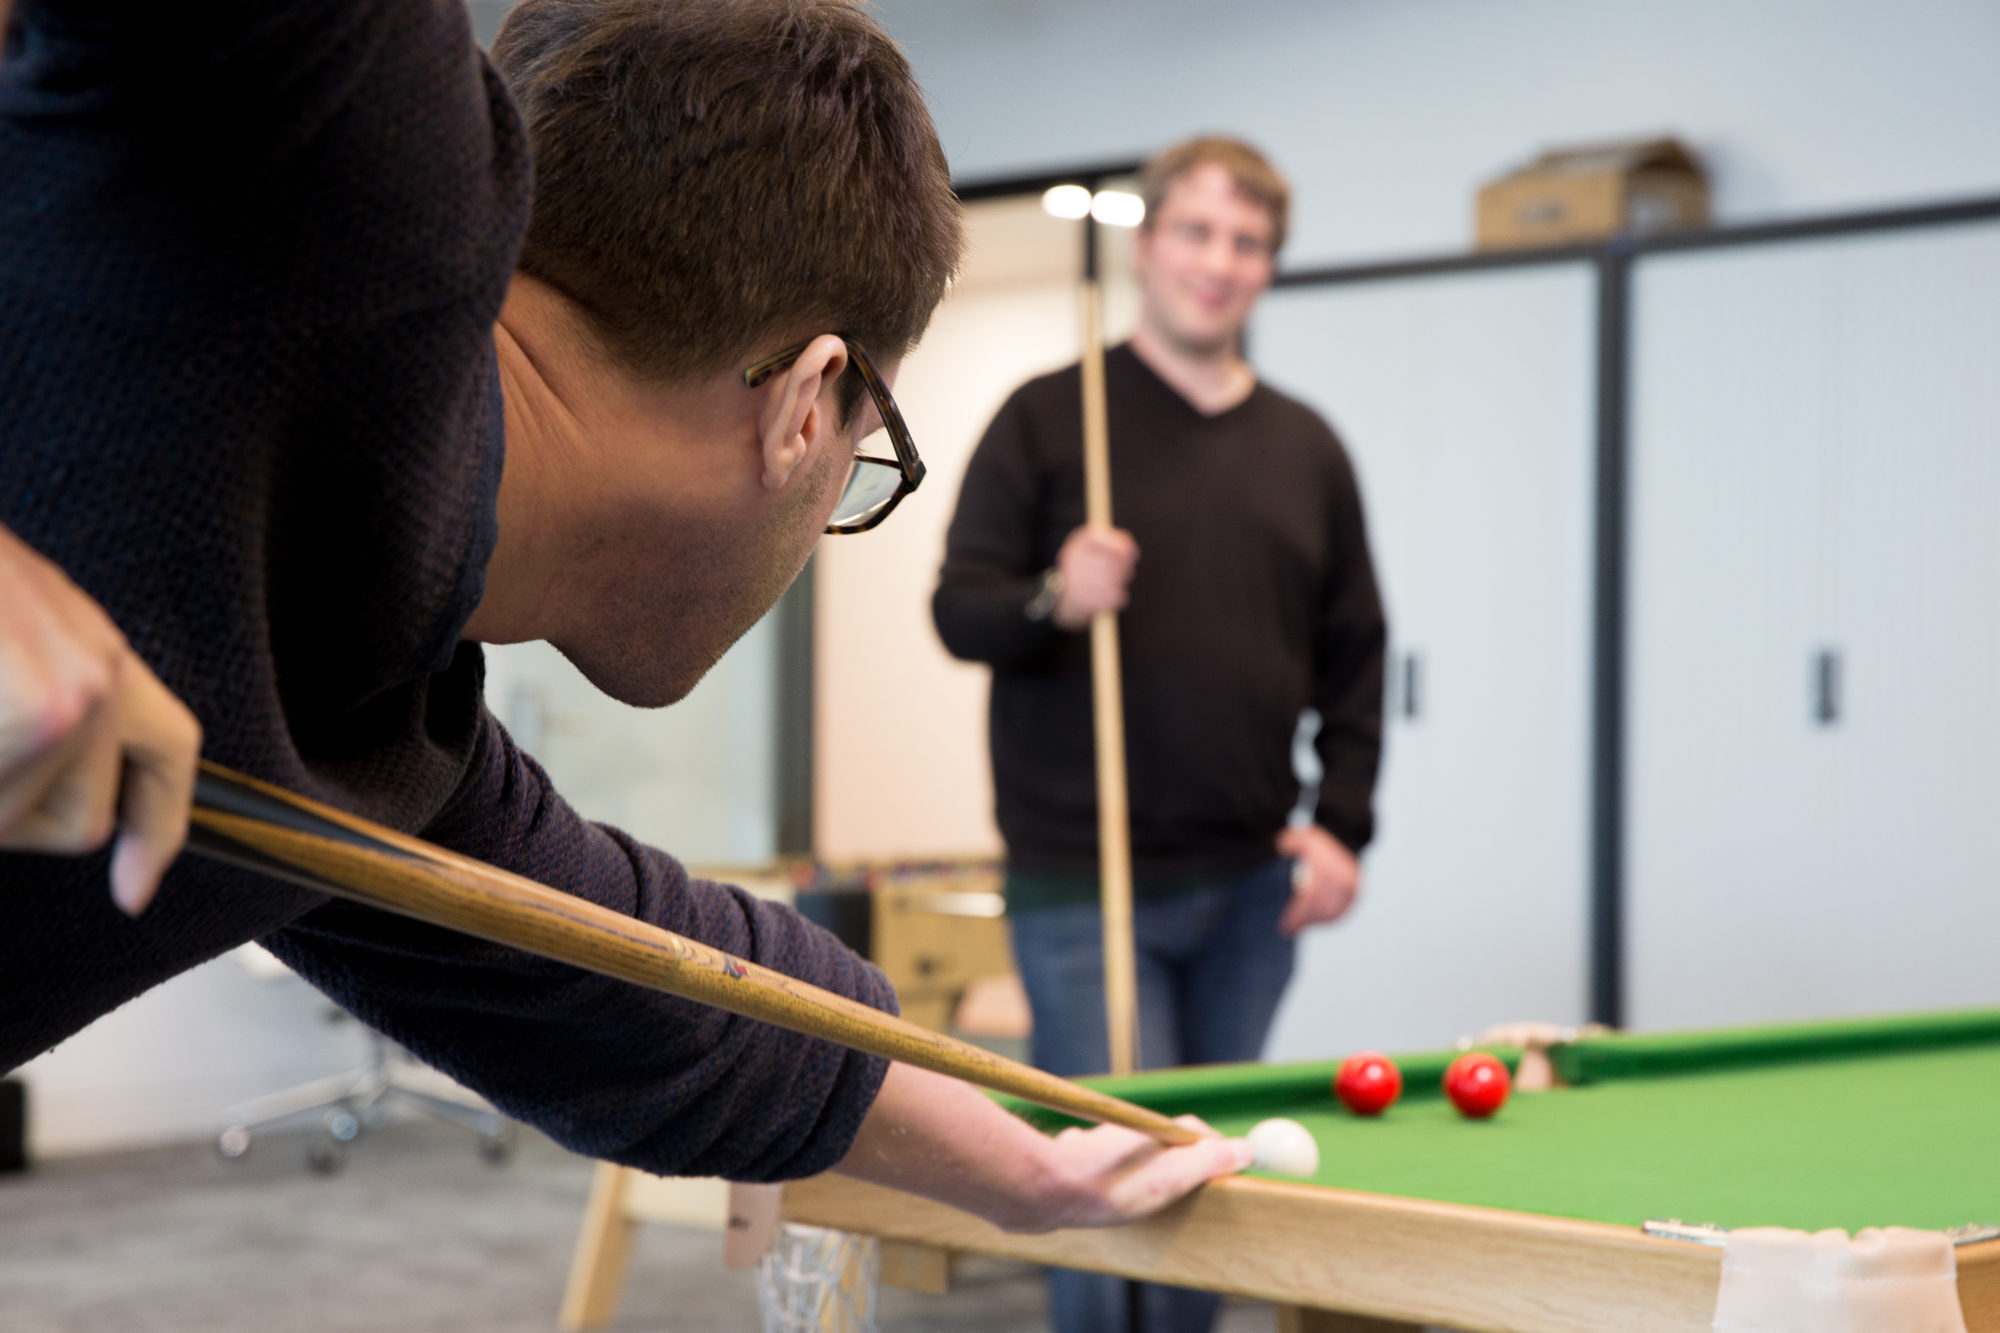 Two Slingshot Simulations employees playing a game of pool.